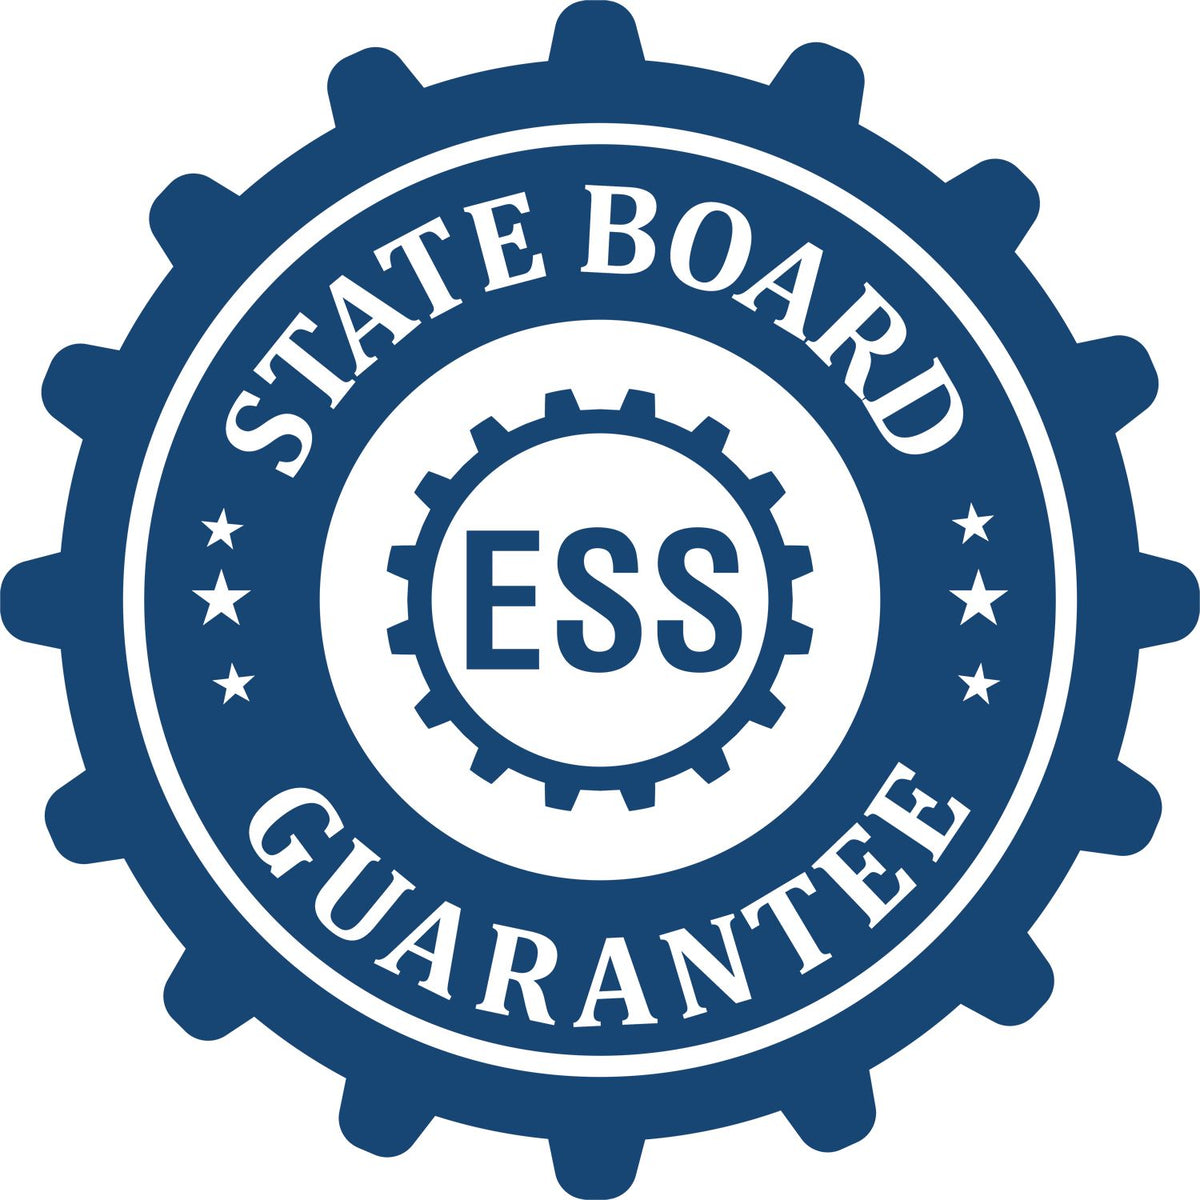 An emblem in a gear shape illustrating a state board guarantee for the Wooden Handle Florida Rectangular Notary Public Stamp product.